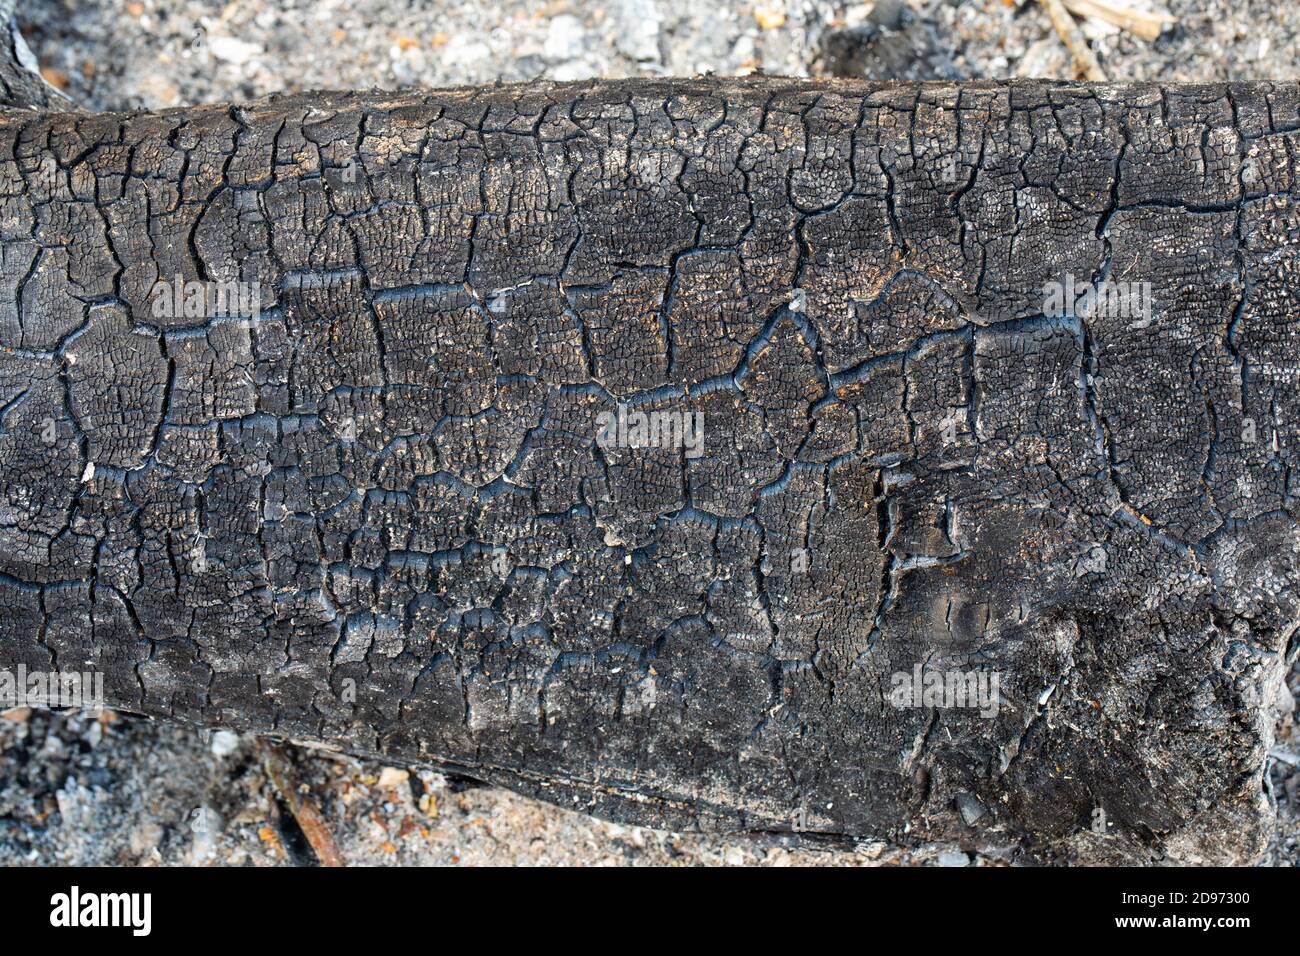 Burnt wood from extinguished, burnt out bonfire. Textures, patterns, stress markings remain. Shades of grey to black, carbon, ash, ashes resulting. Stock Photo